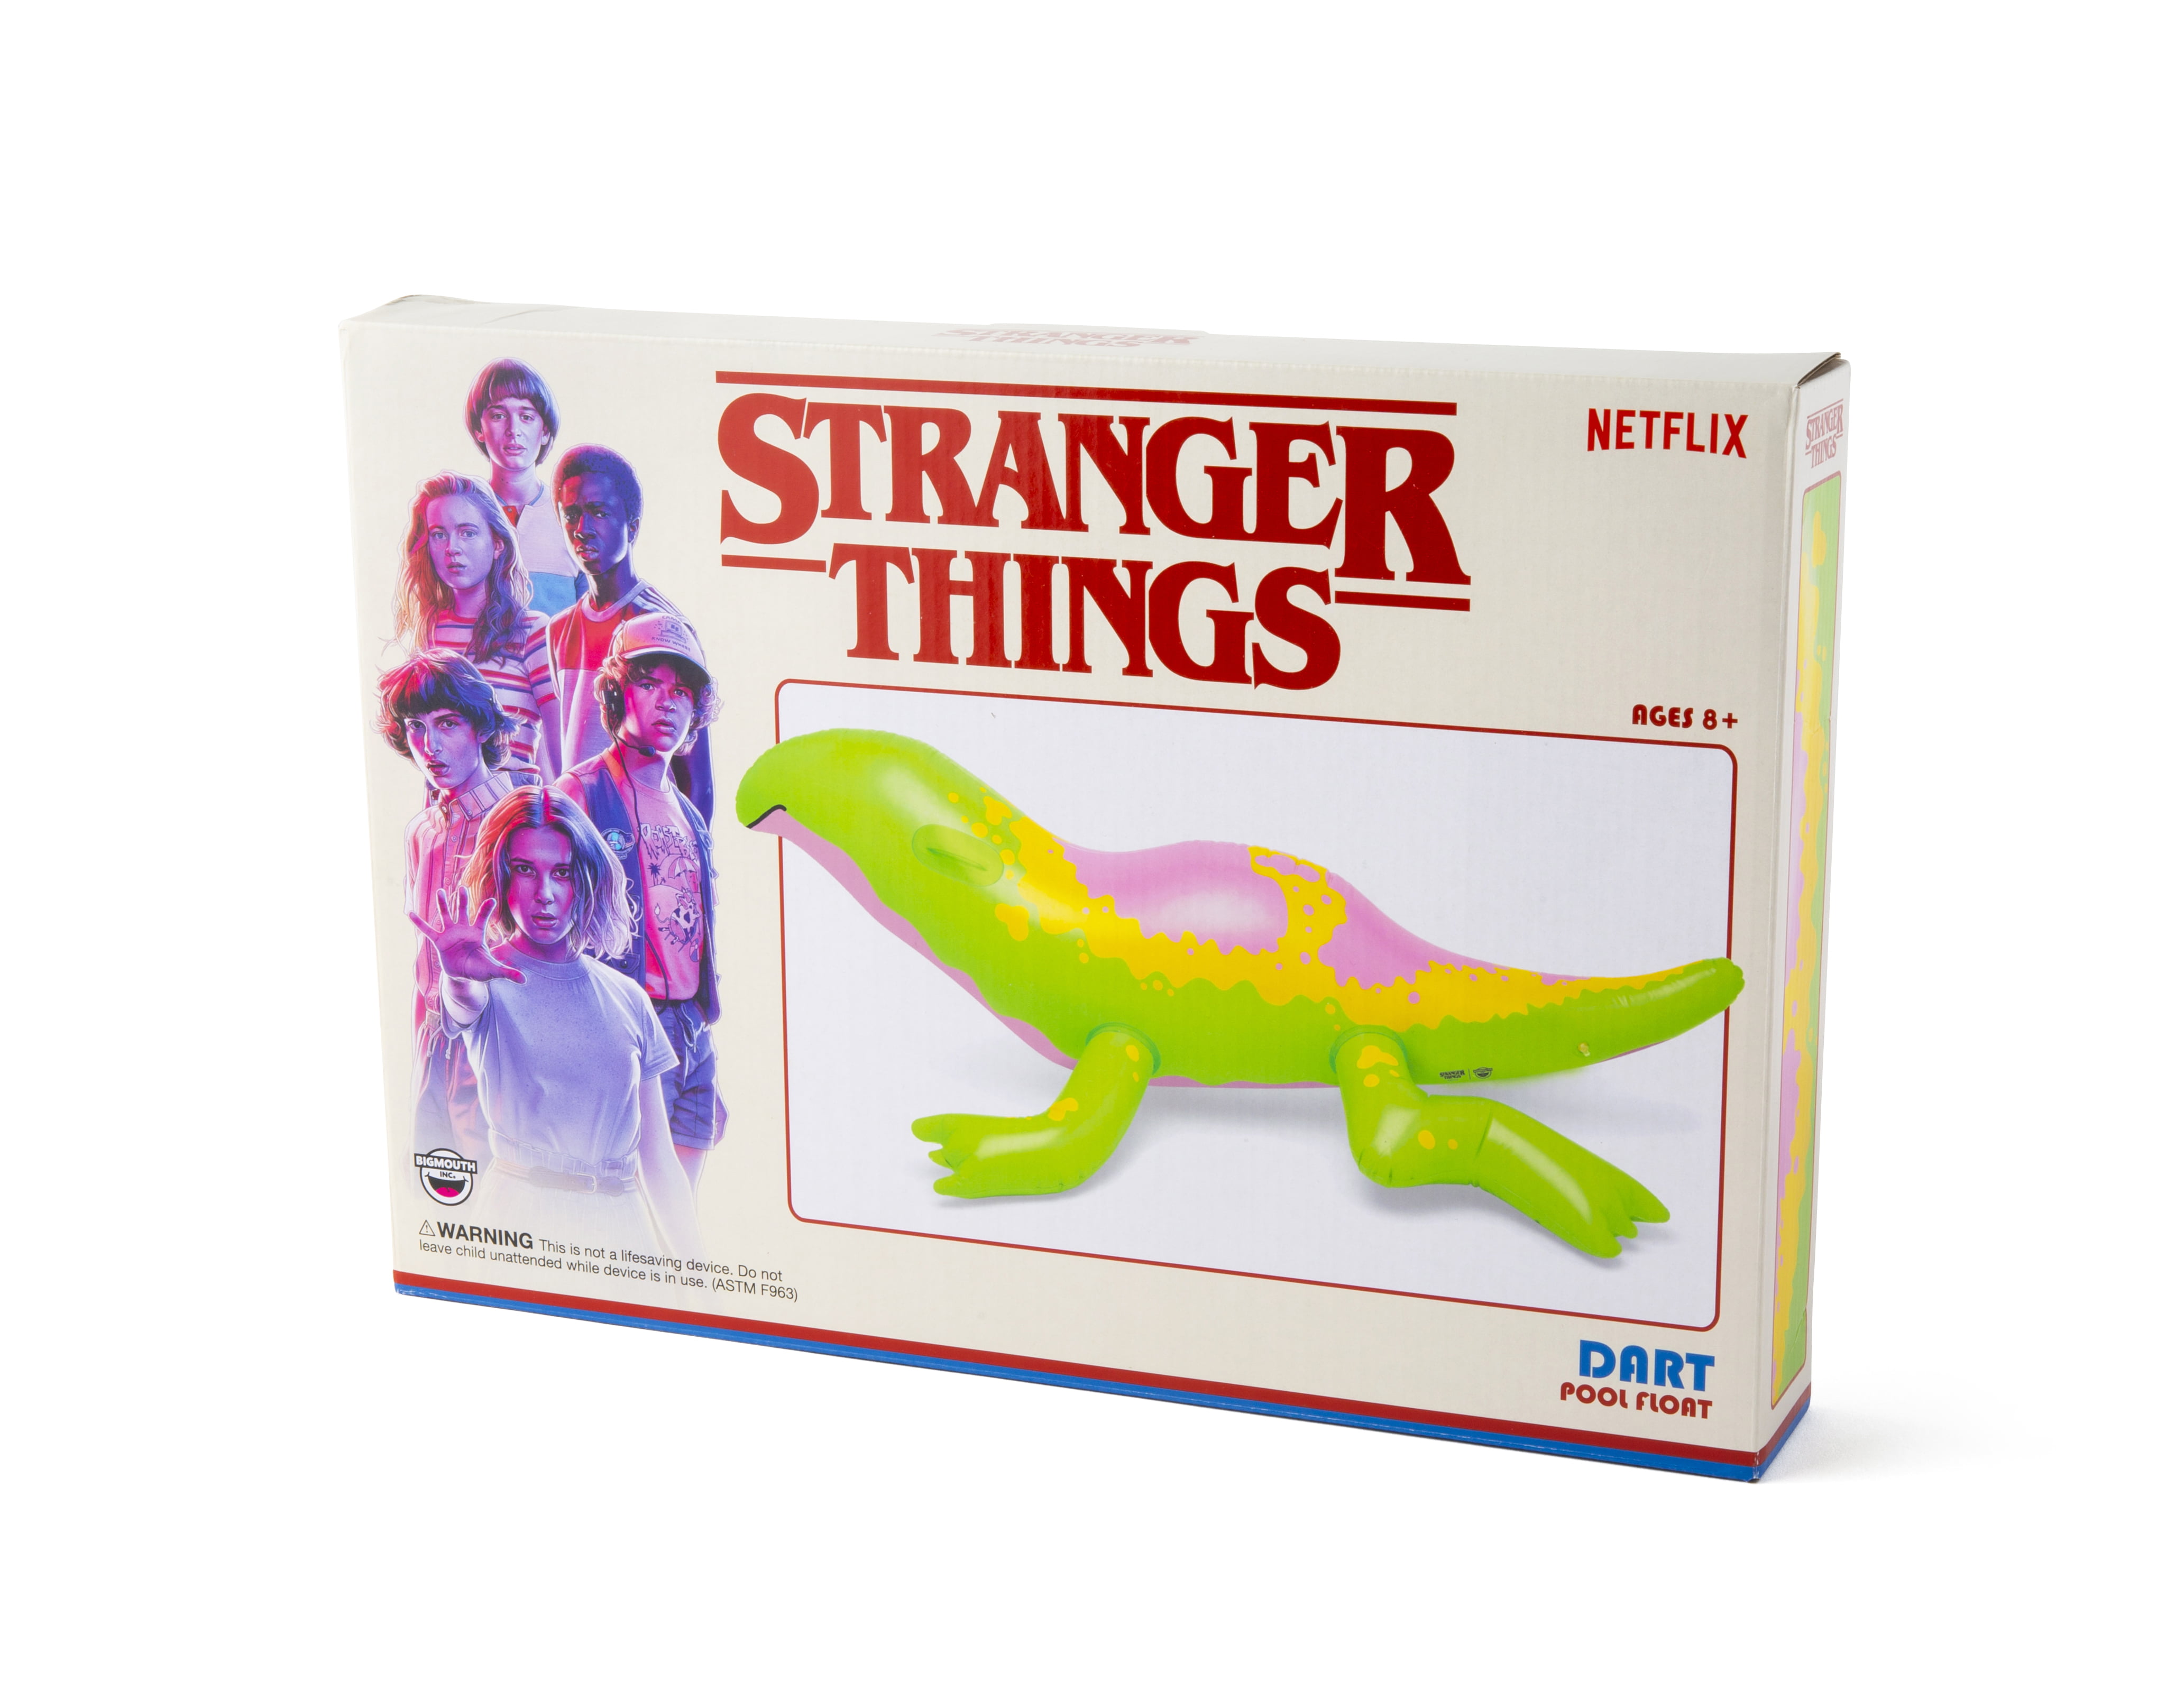 Netflix Stranger Things 'dart' Pool Float by Bigmouth Inc for sale online 